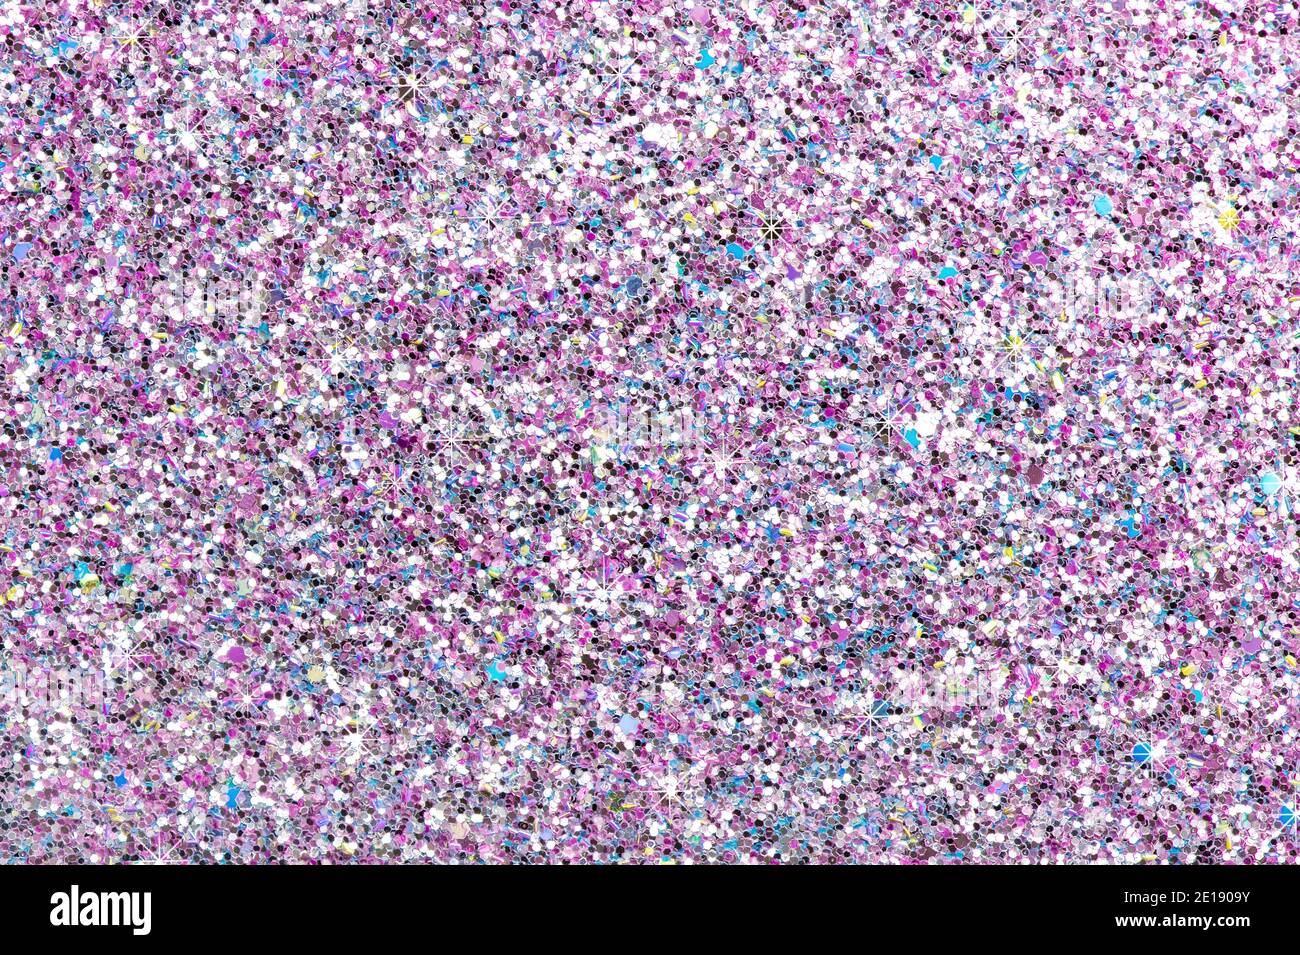 Glitter texture with shining glimmer. Festive background Stock Photo